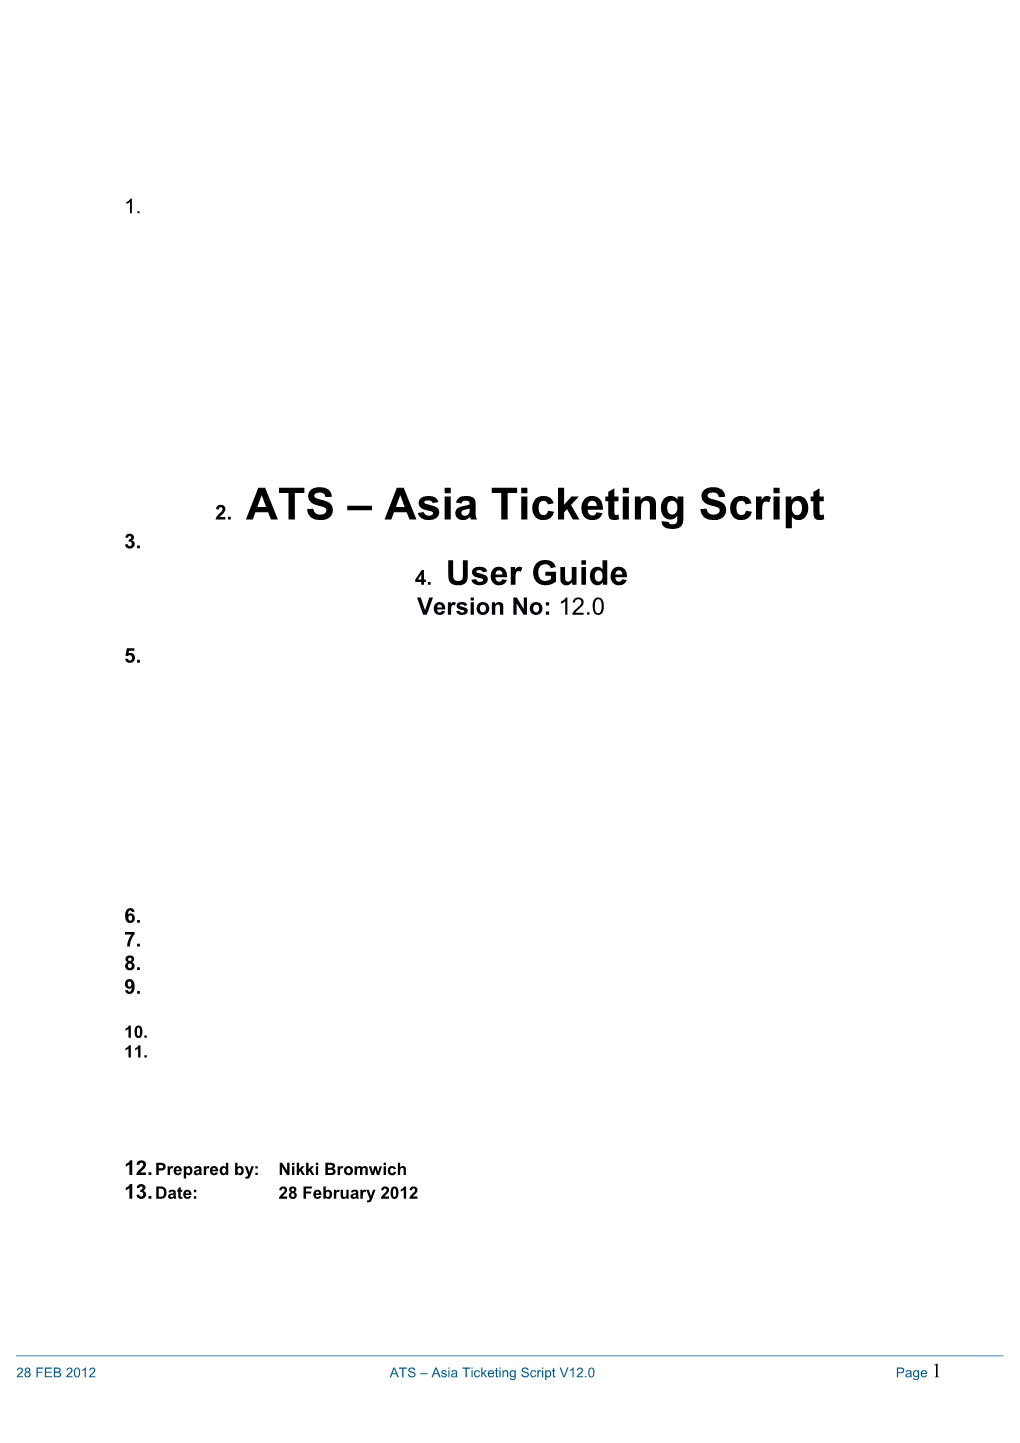 ATS User Guide 12.0